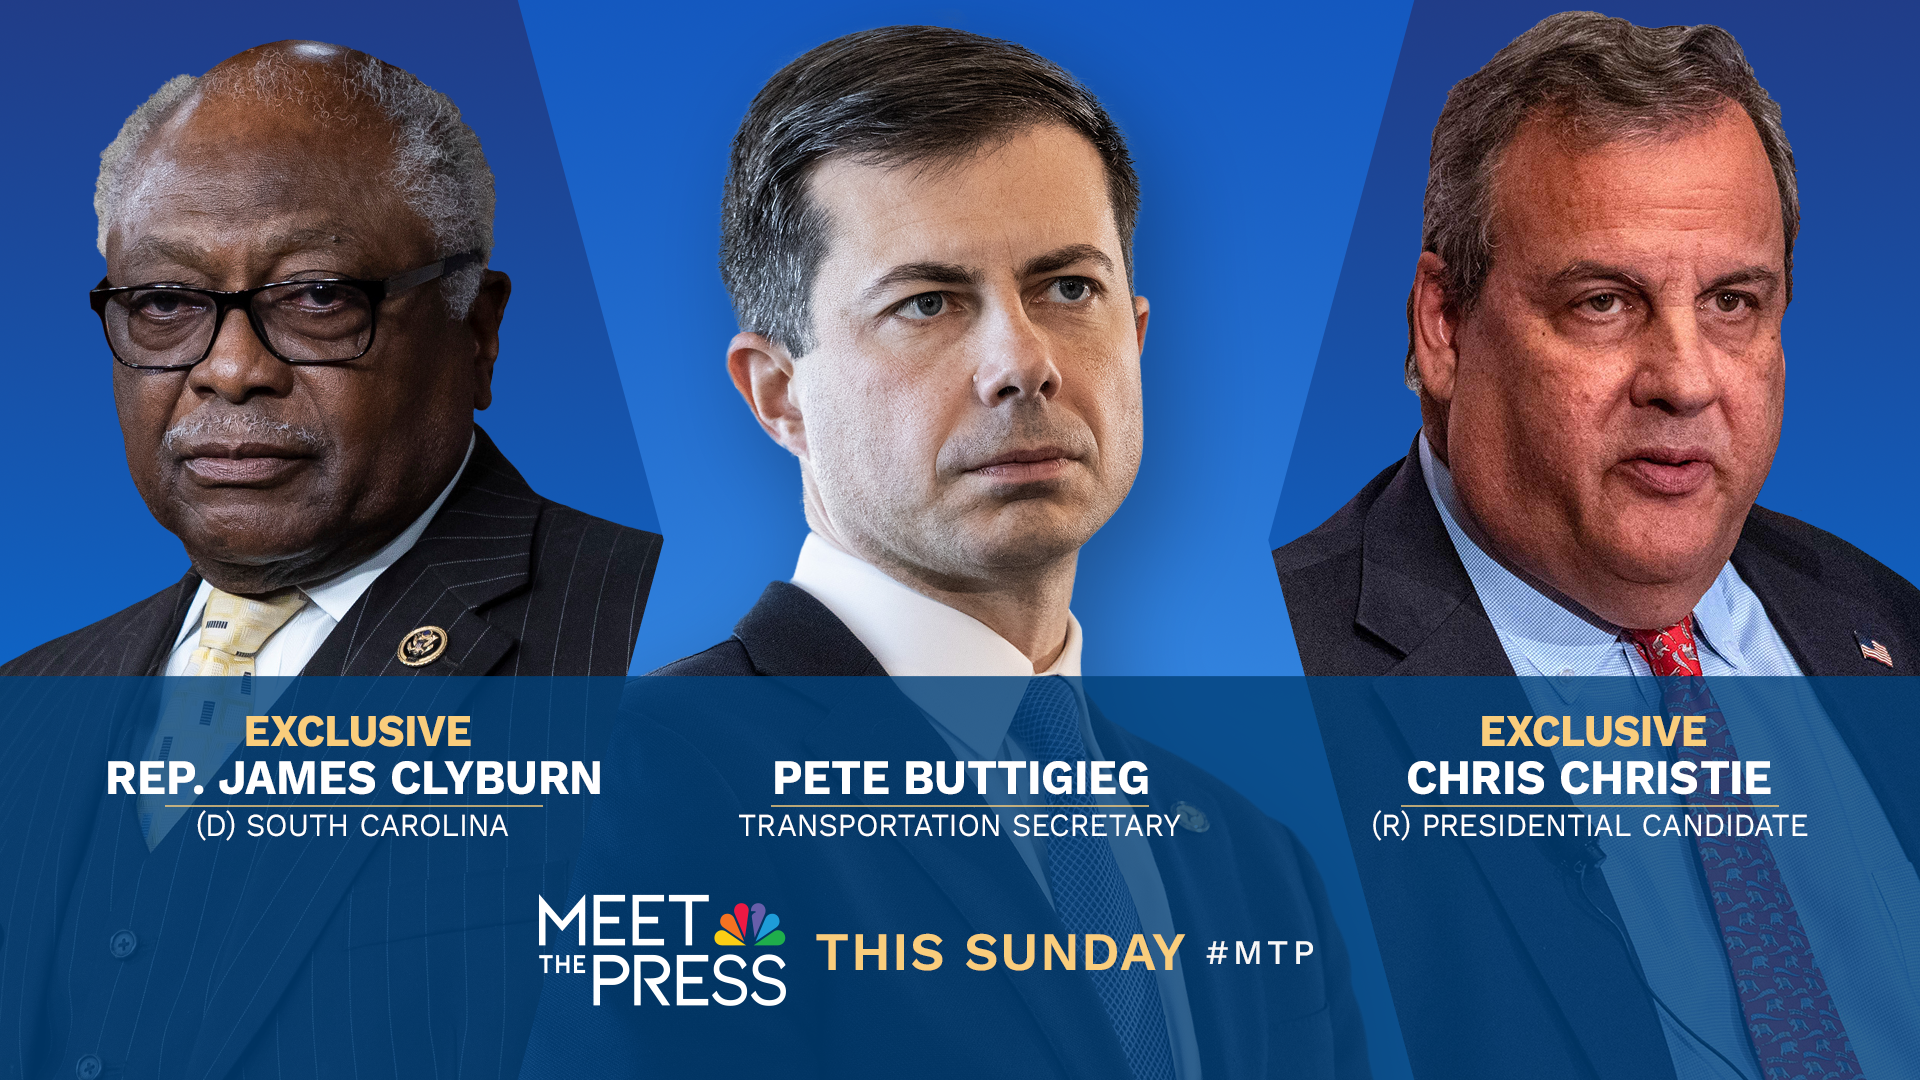 EXCLUSIVE INTERVIEWS WITH FORMER GOV. CHRIS CHRISTIE & REP. JAMES CLYBURN THIS SUNDAY ON “MEET THE PRESS WITH KRISTEN WELKER”